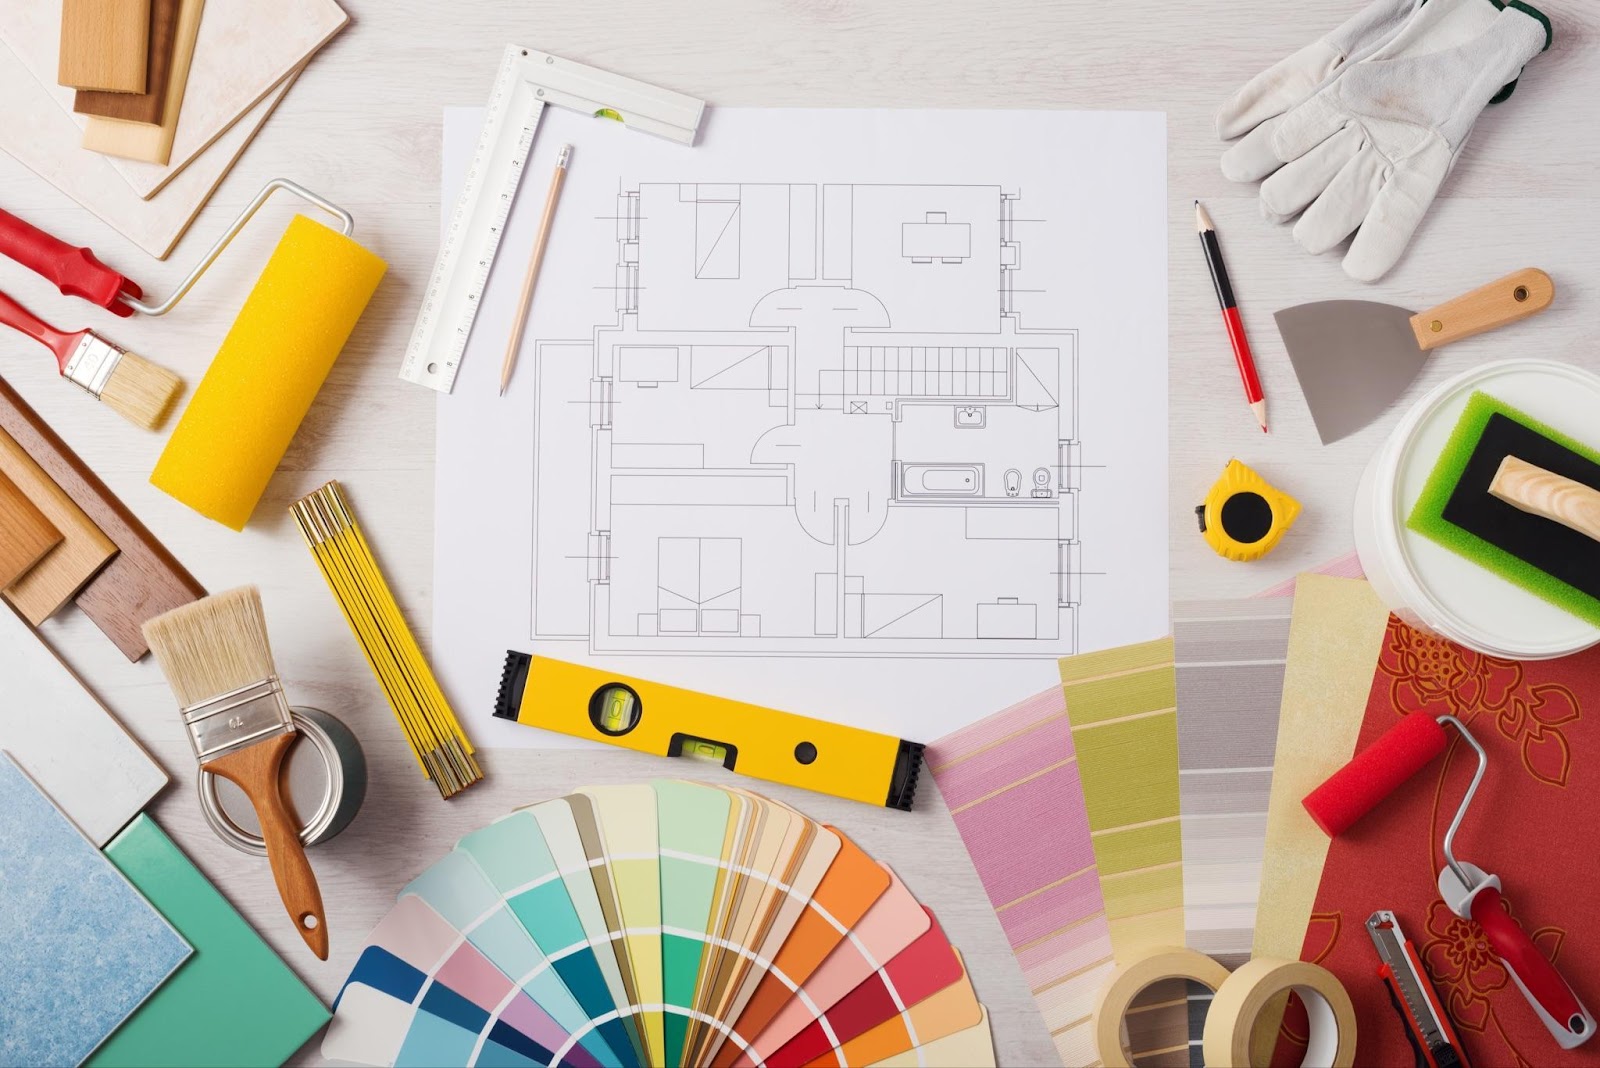 Here Are 5 Things You Need to Consider While Looking for Interior Designers in Indore